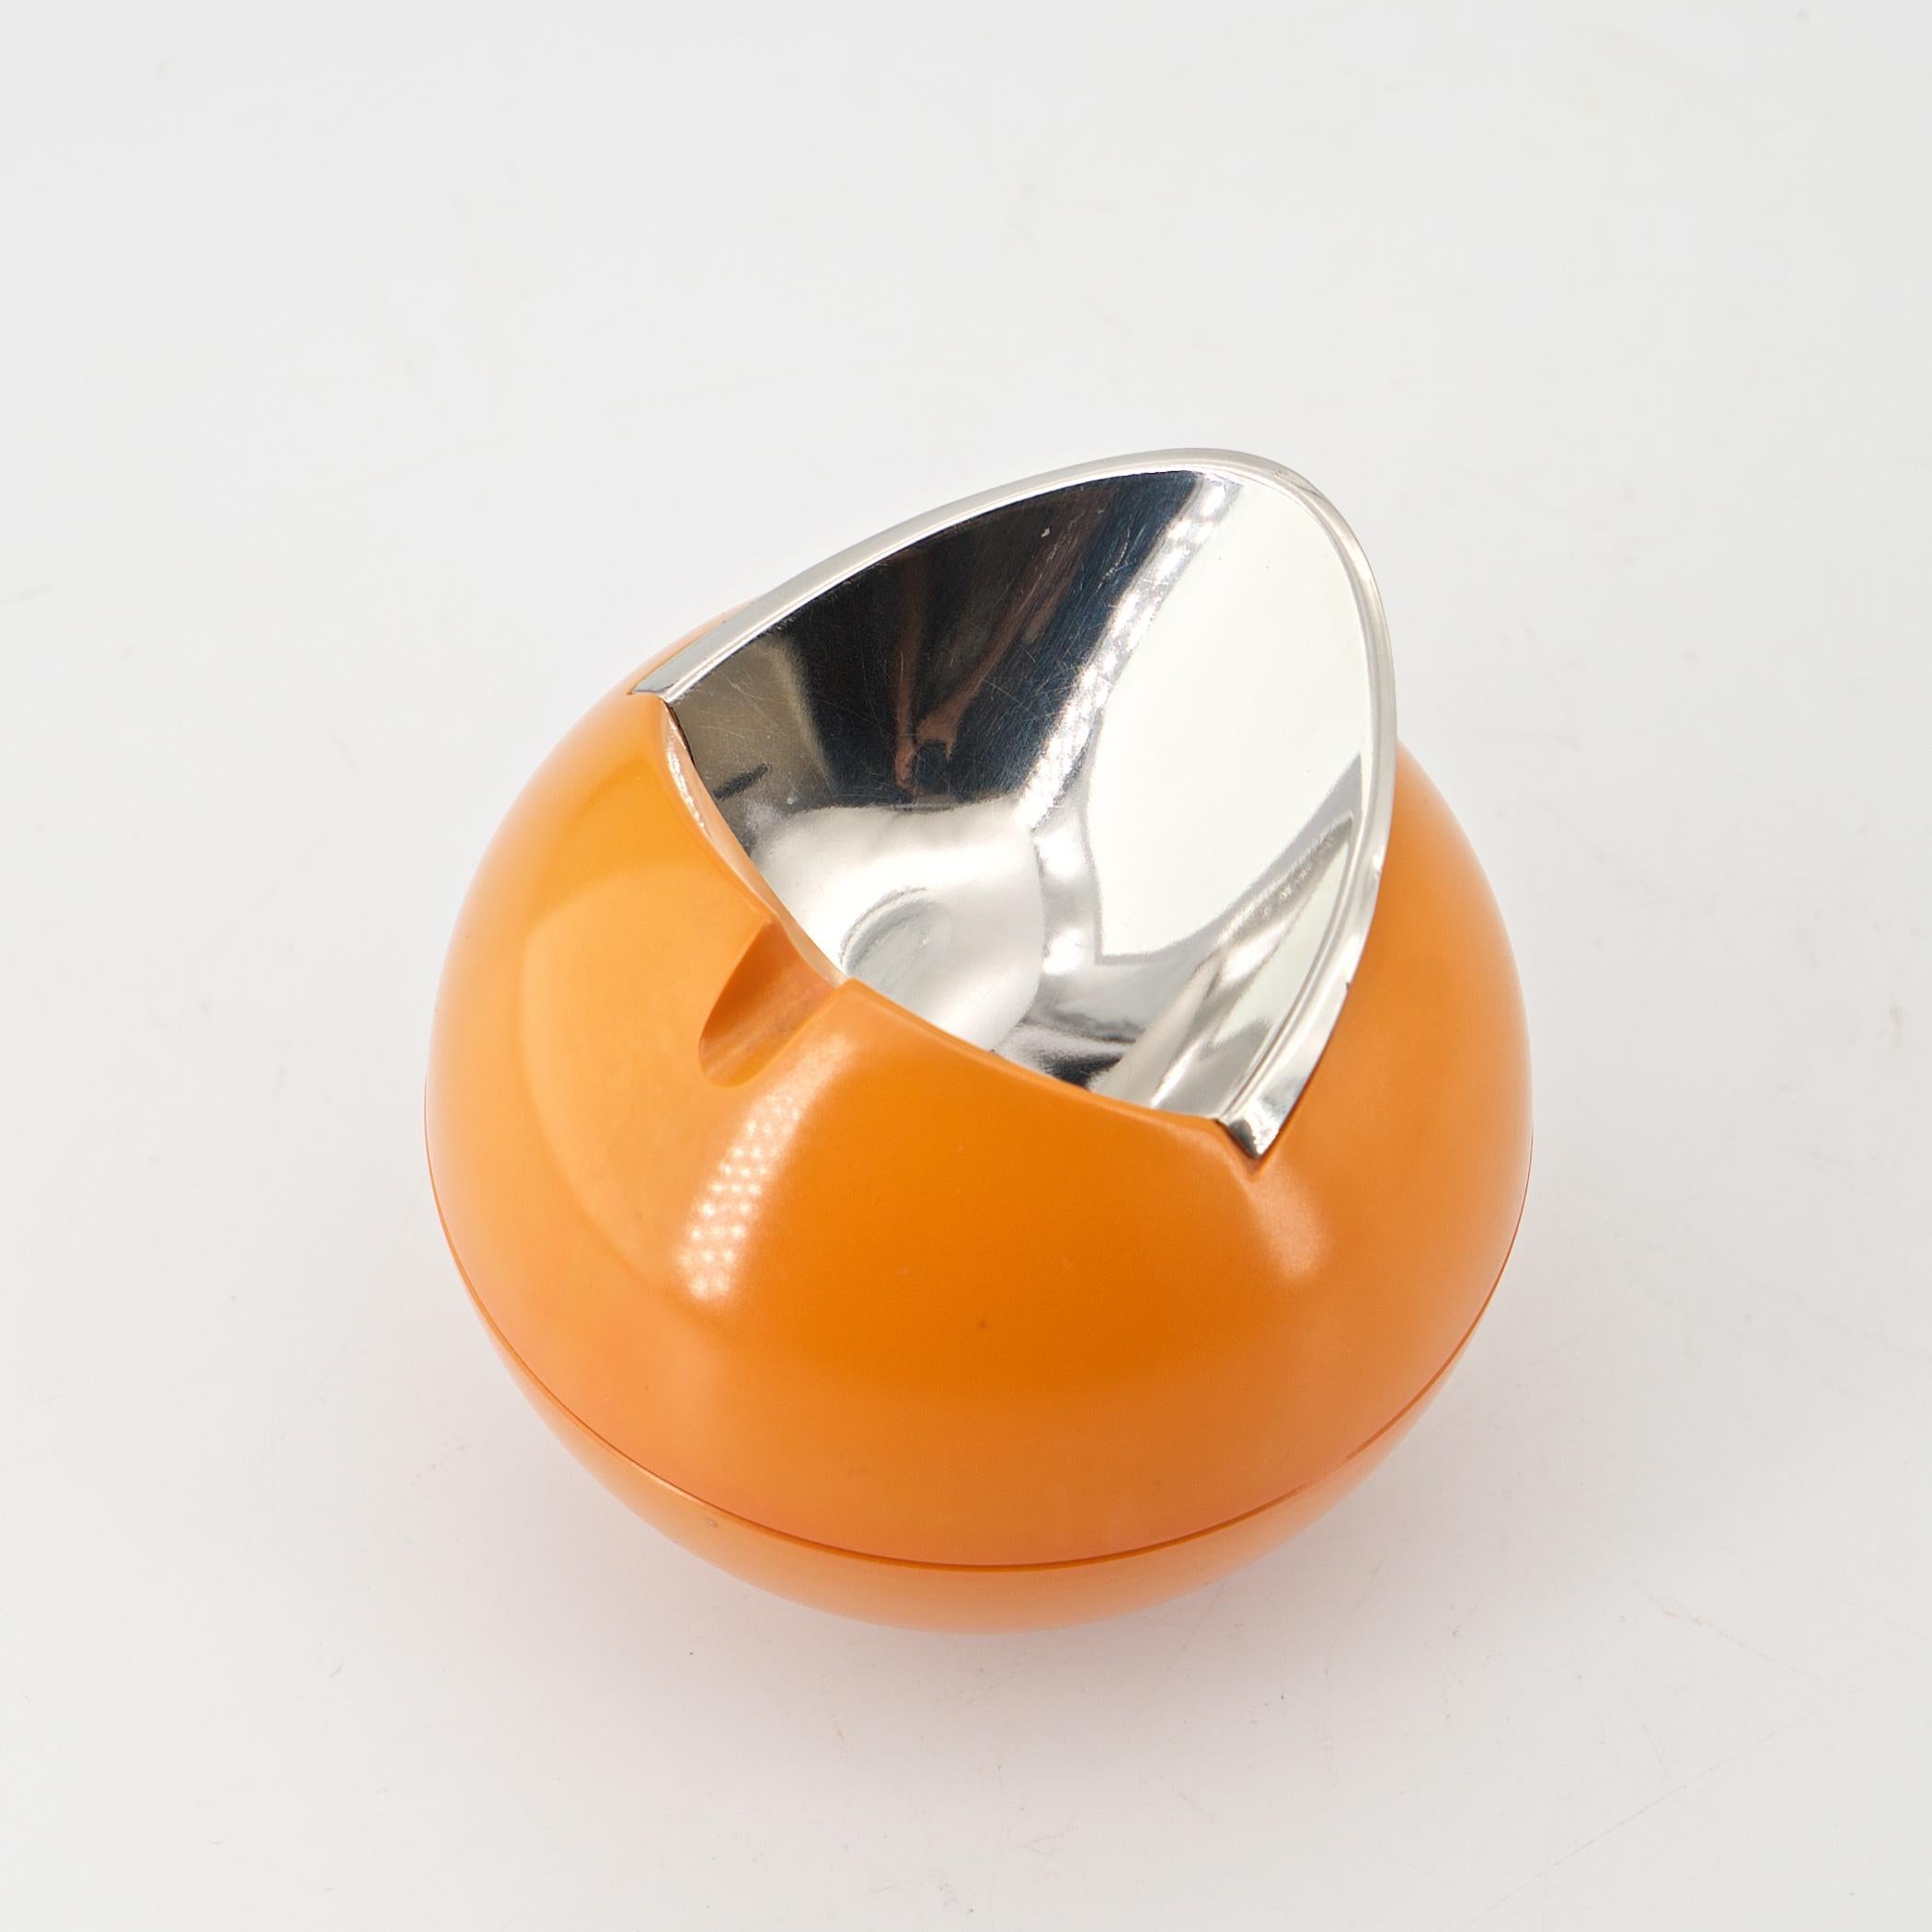 1960s Orb Ashtray Mod Psychedelic Orange Mid-Century Plastic + Steel Sculpture In Good Condition For Sale In Hyattsville, MD